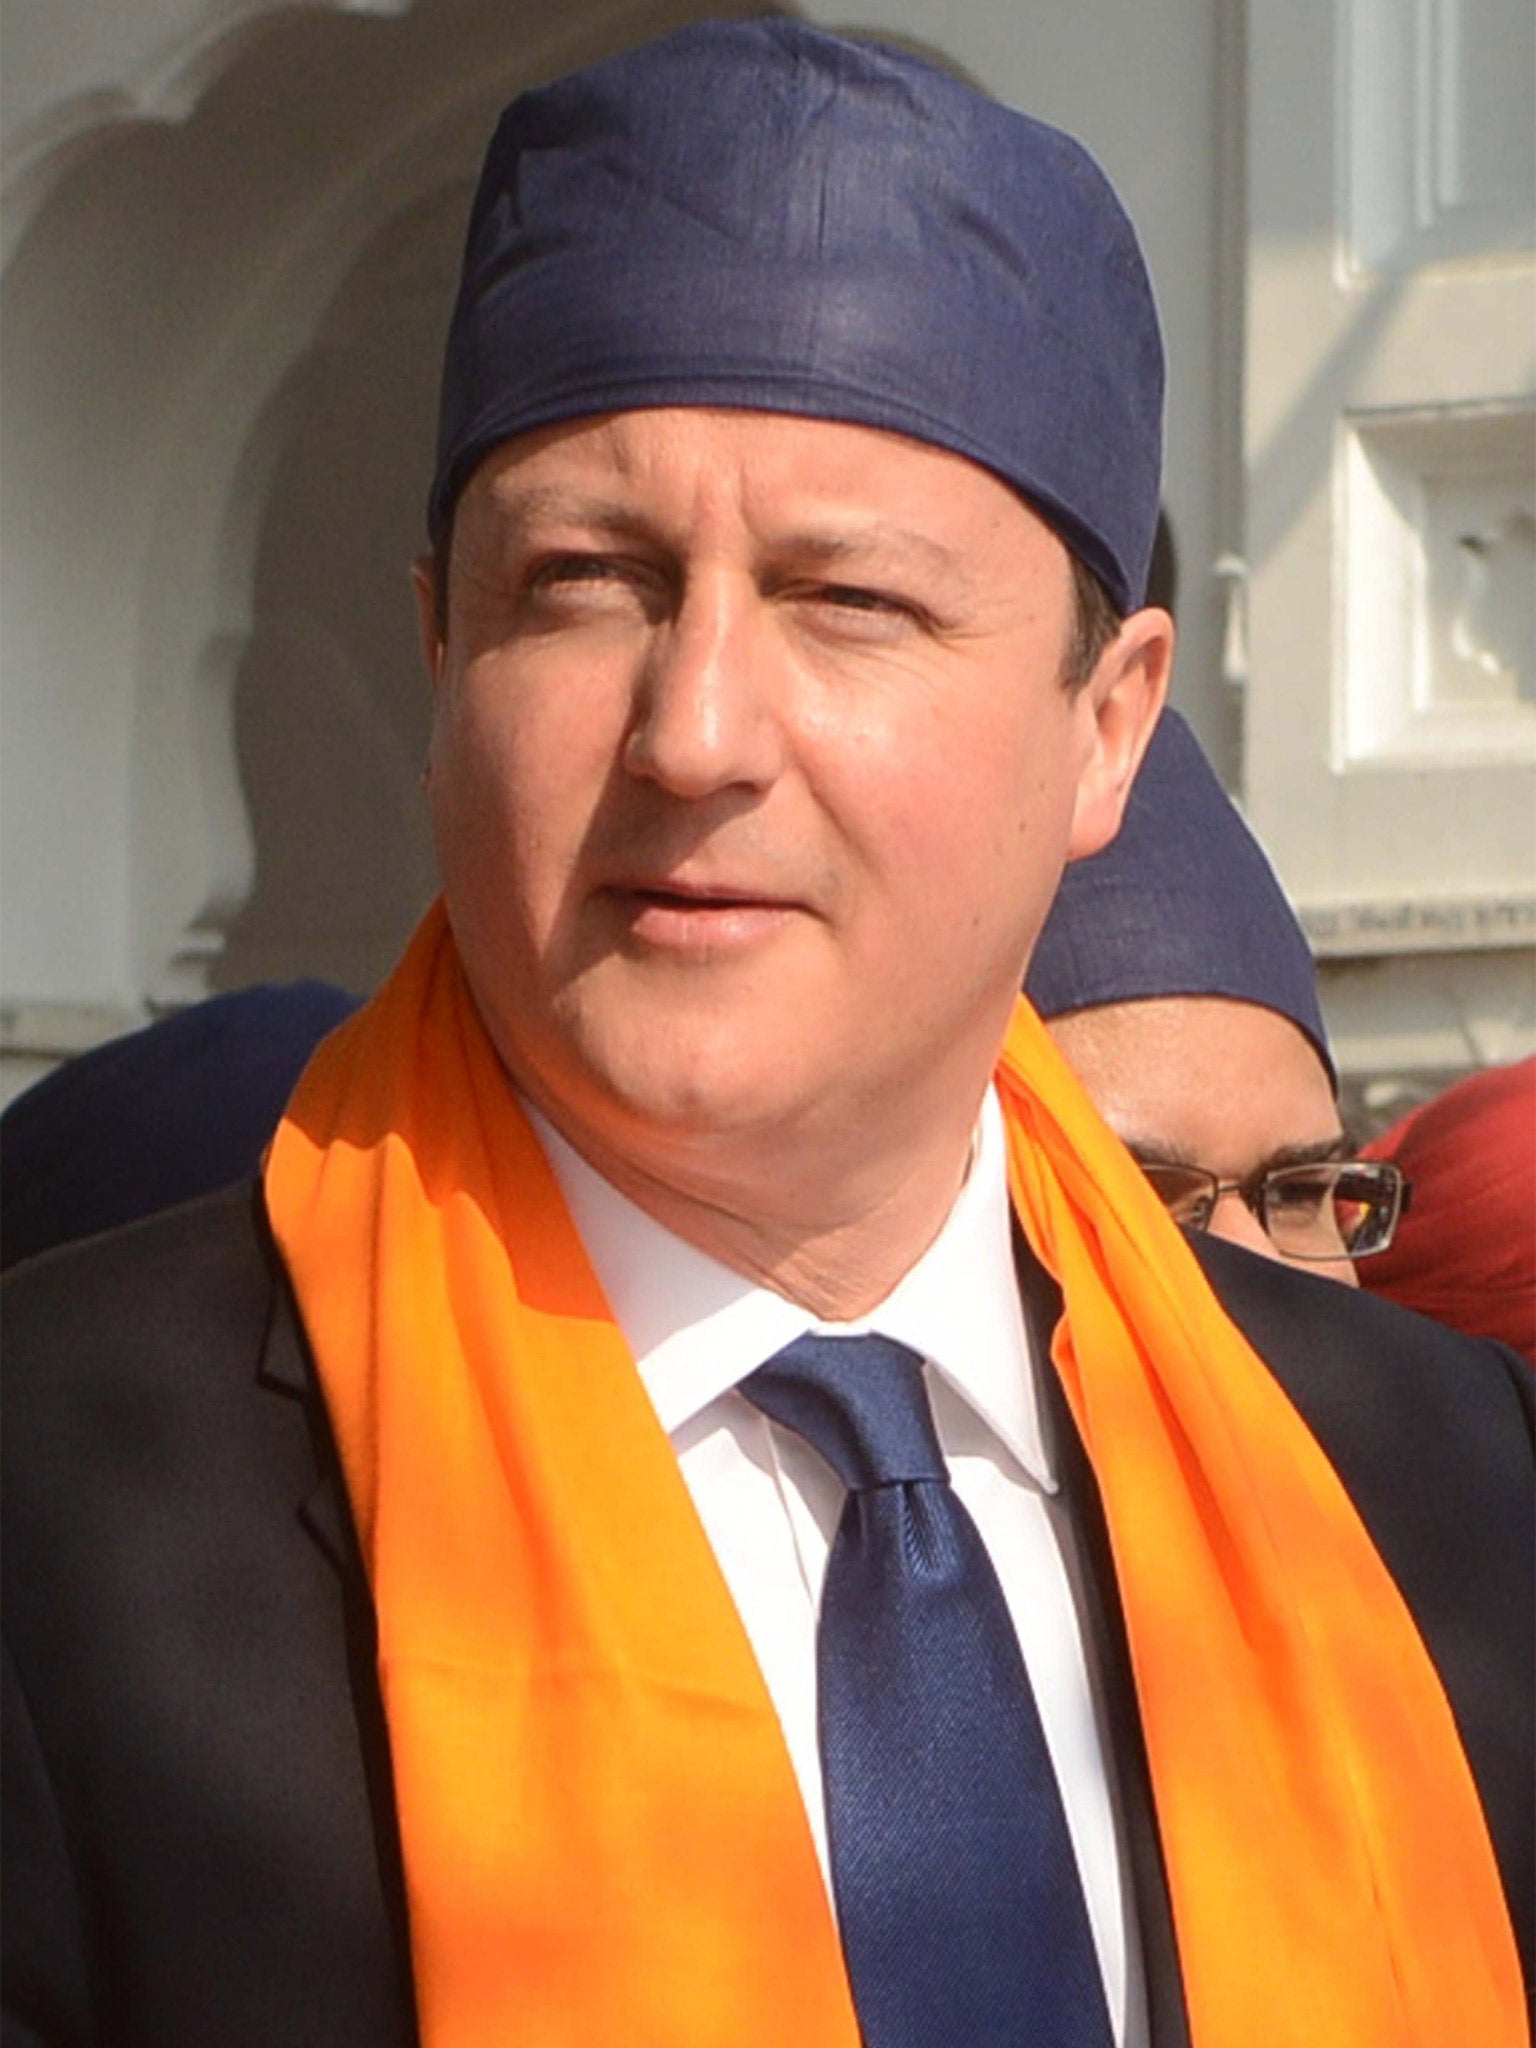 Prime Minister David Cameron sports a new look